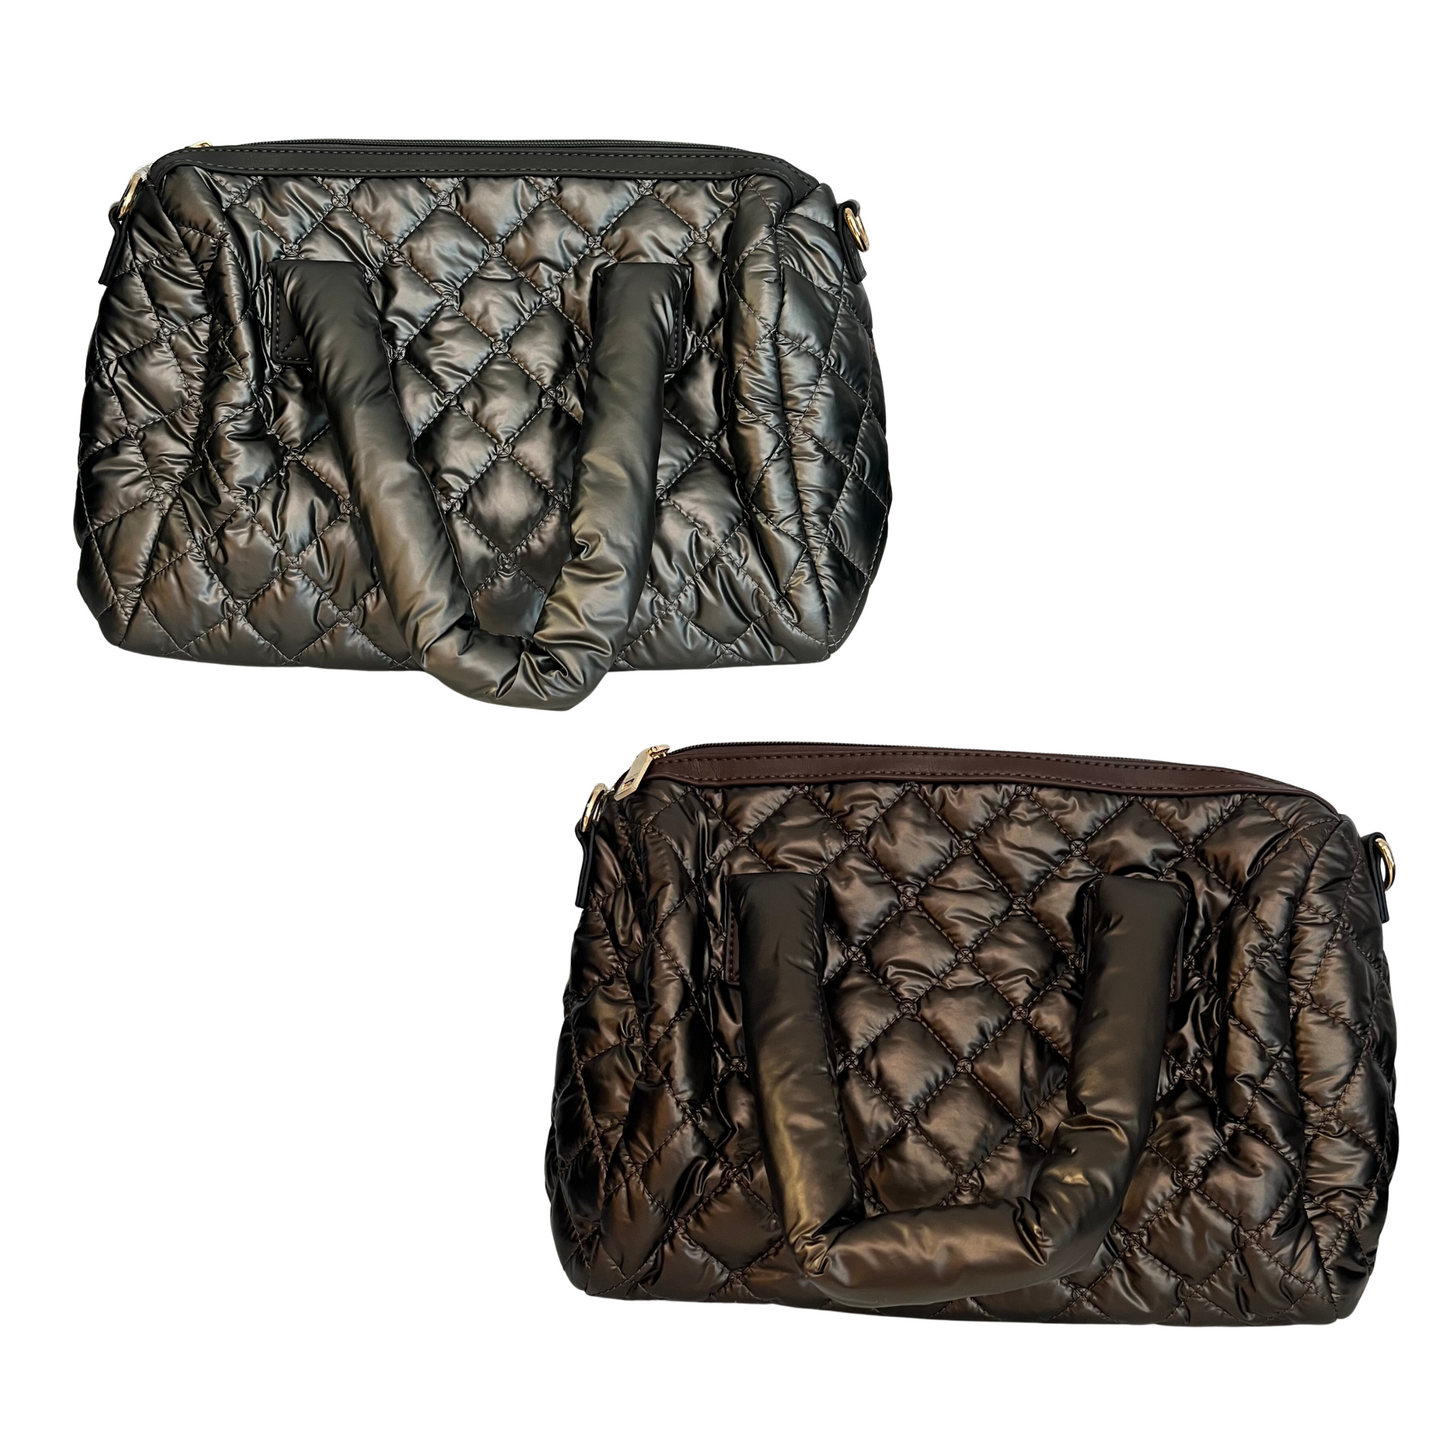 The Trista Handbag is a fashionable and functional choice that comes in two stylish colors--Gunmetal and brown. It features a quilted design and is constructed from lightweight materials for a comfortable carry. Perfect for everyday use, this bag will add a touch of sophistication to any ensemble.